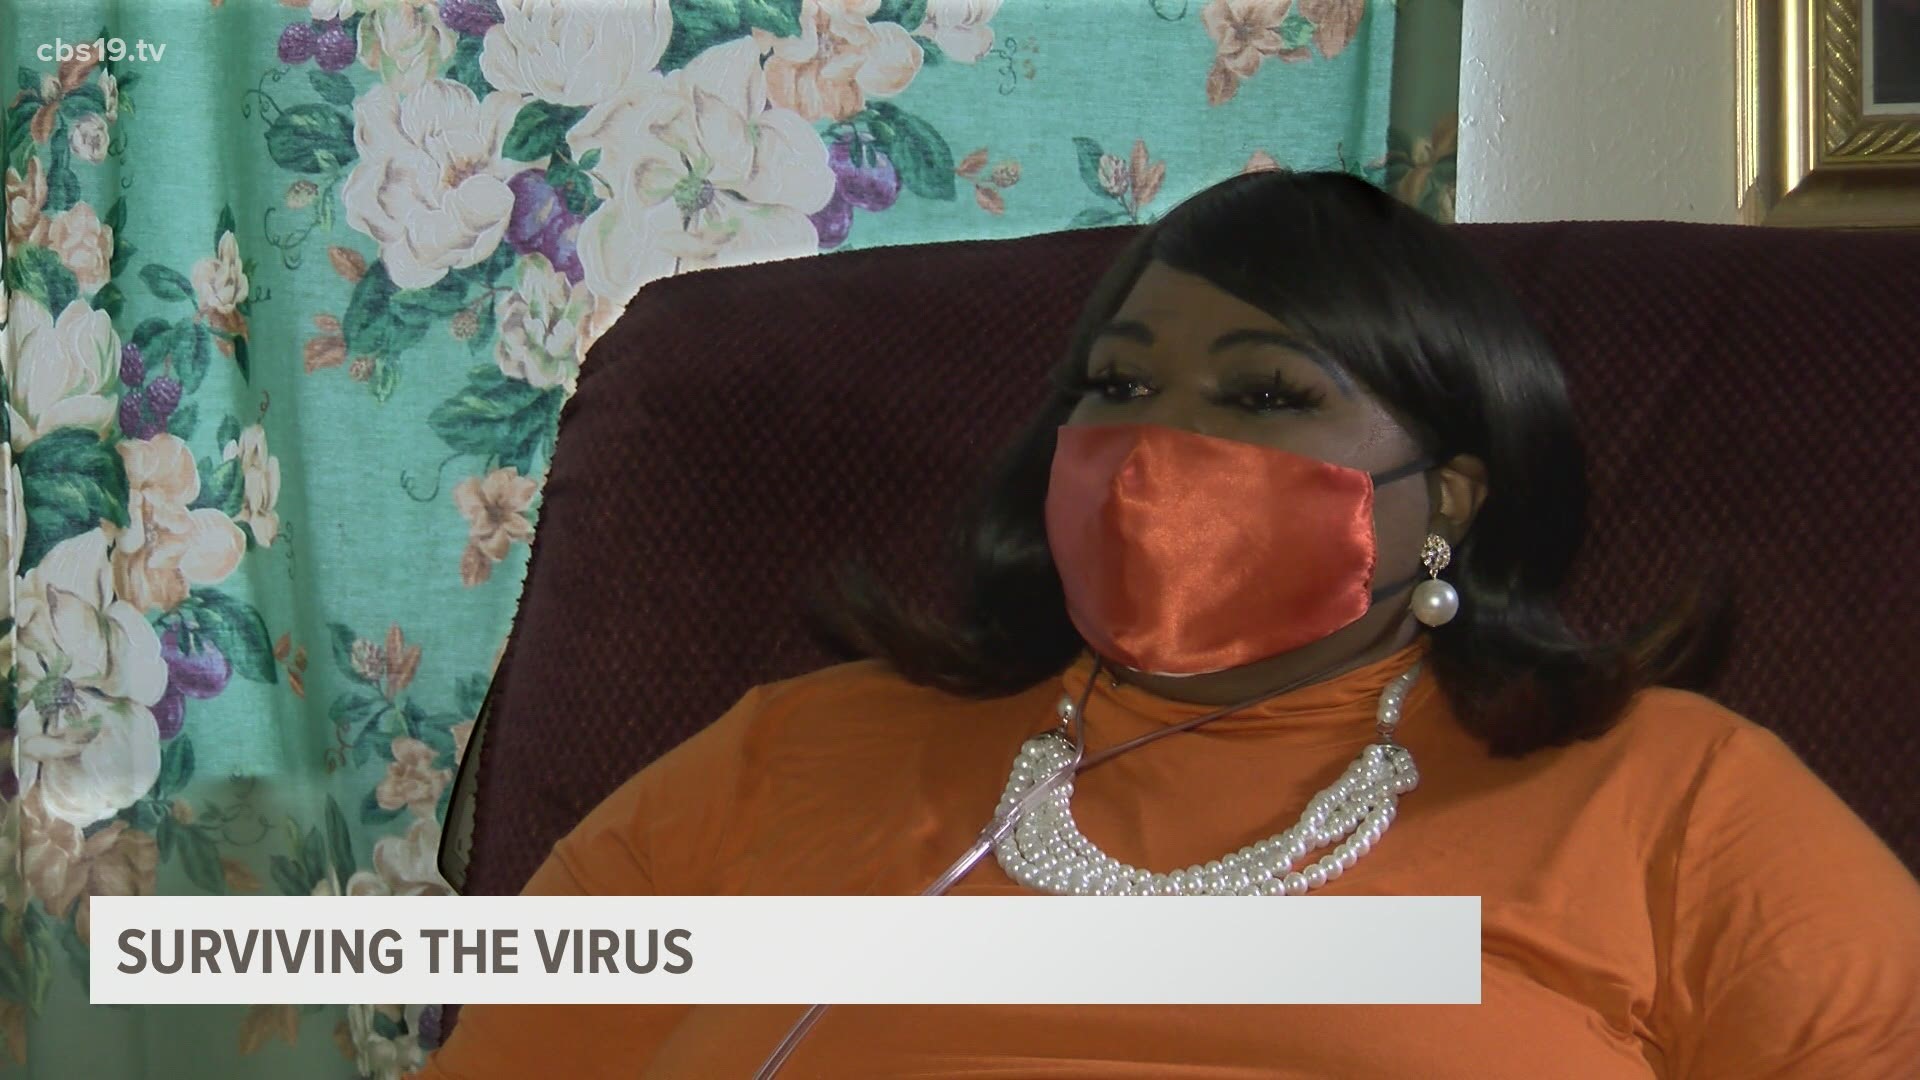 This is Cynthia Montgomery surviving the virus.